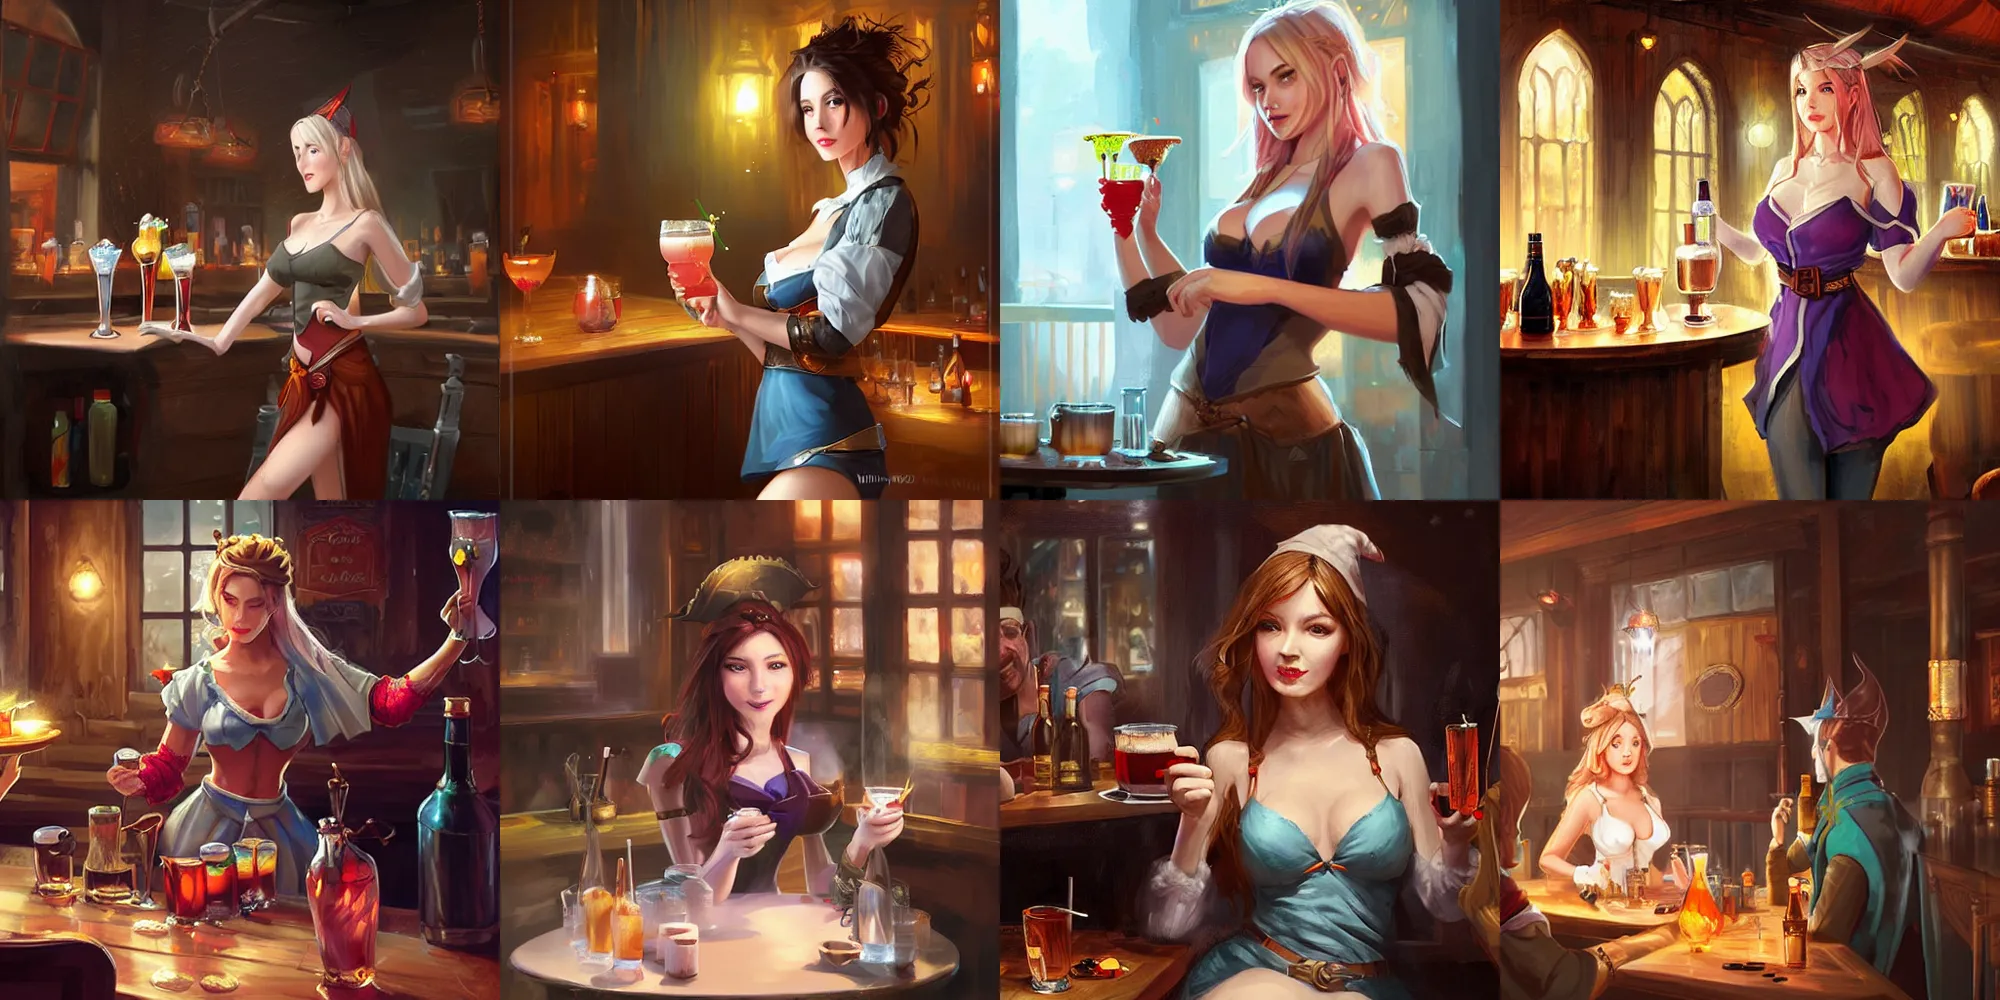 Prompt: A waitress sorceress in a fantasy tavern serves drinks to customers, digital painting by WLOP.